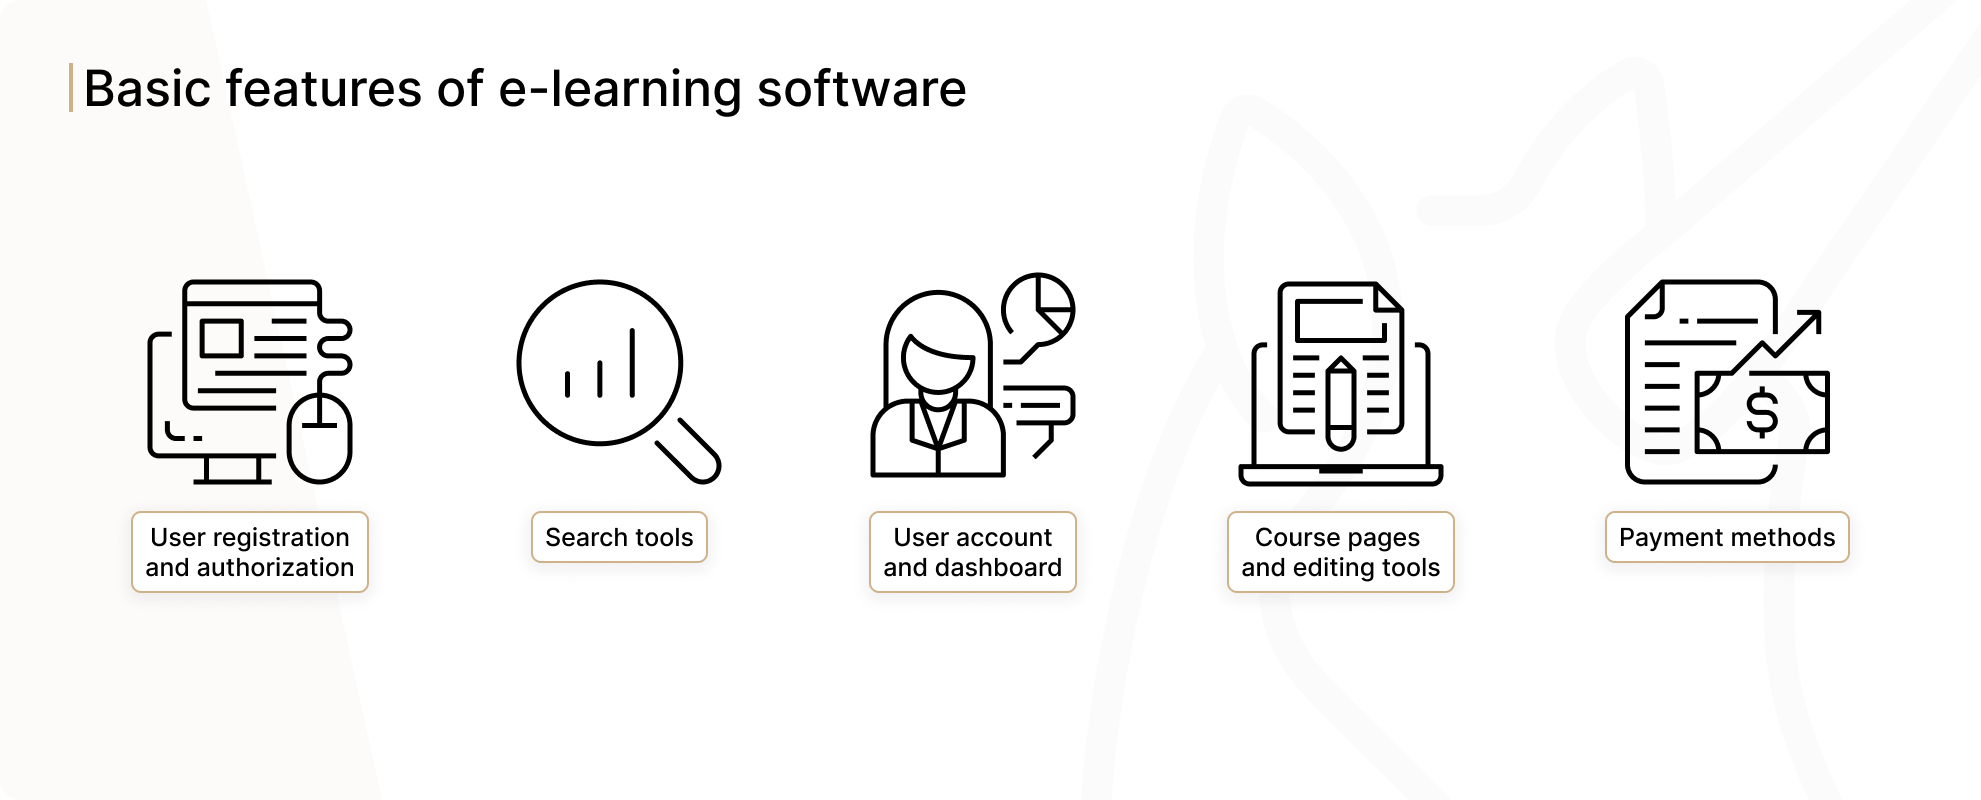 Basic features of e-learning software